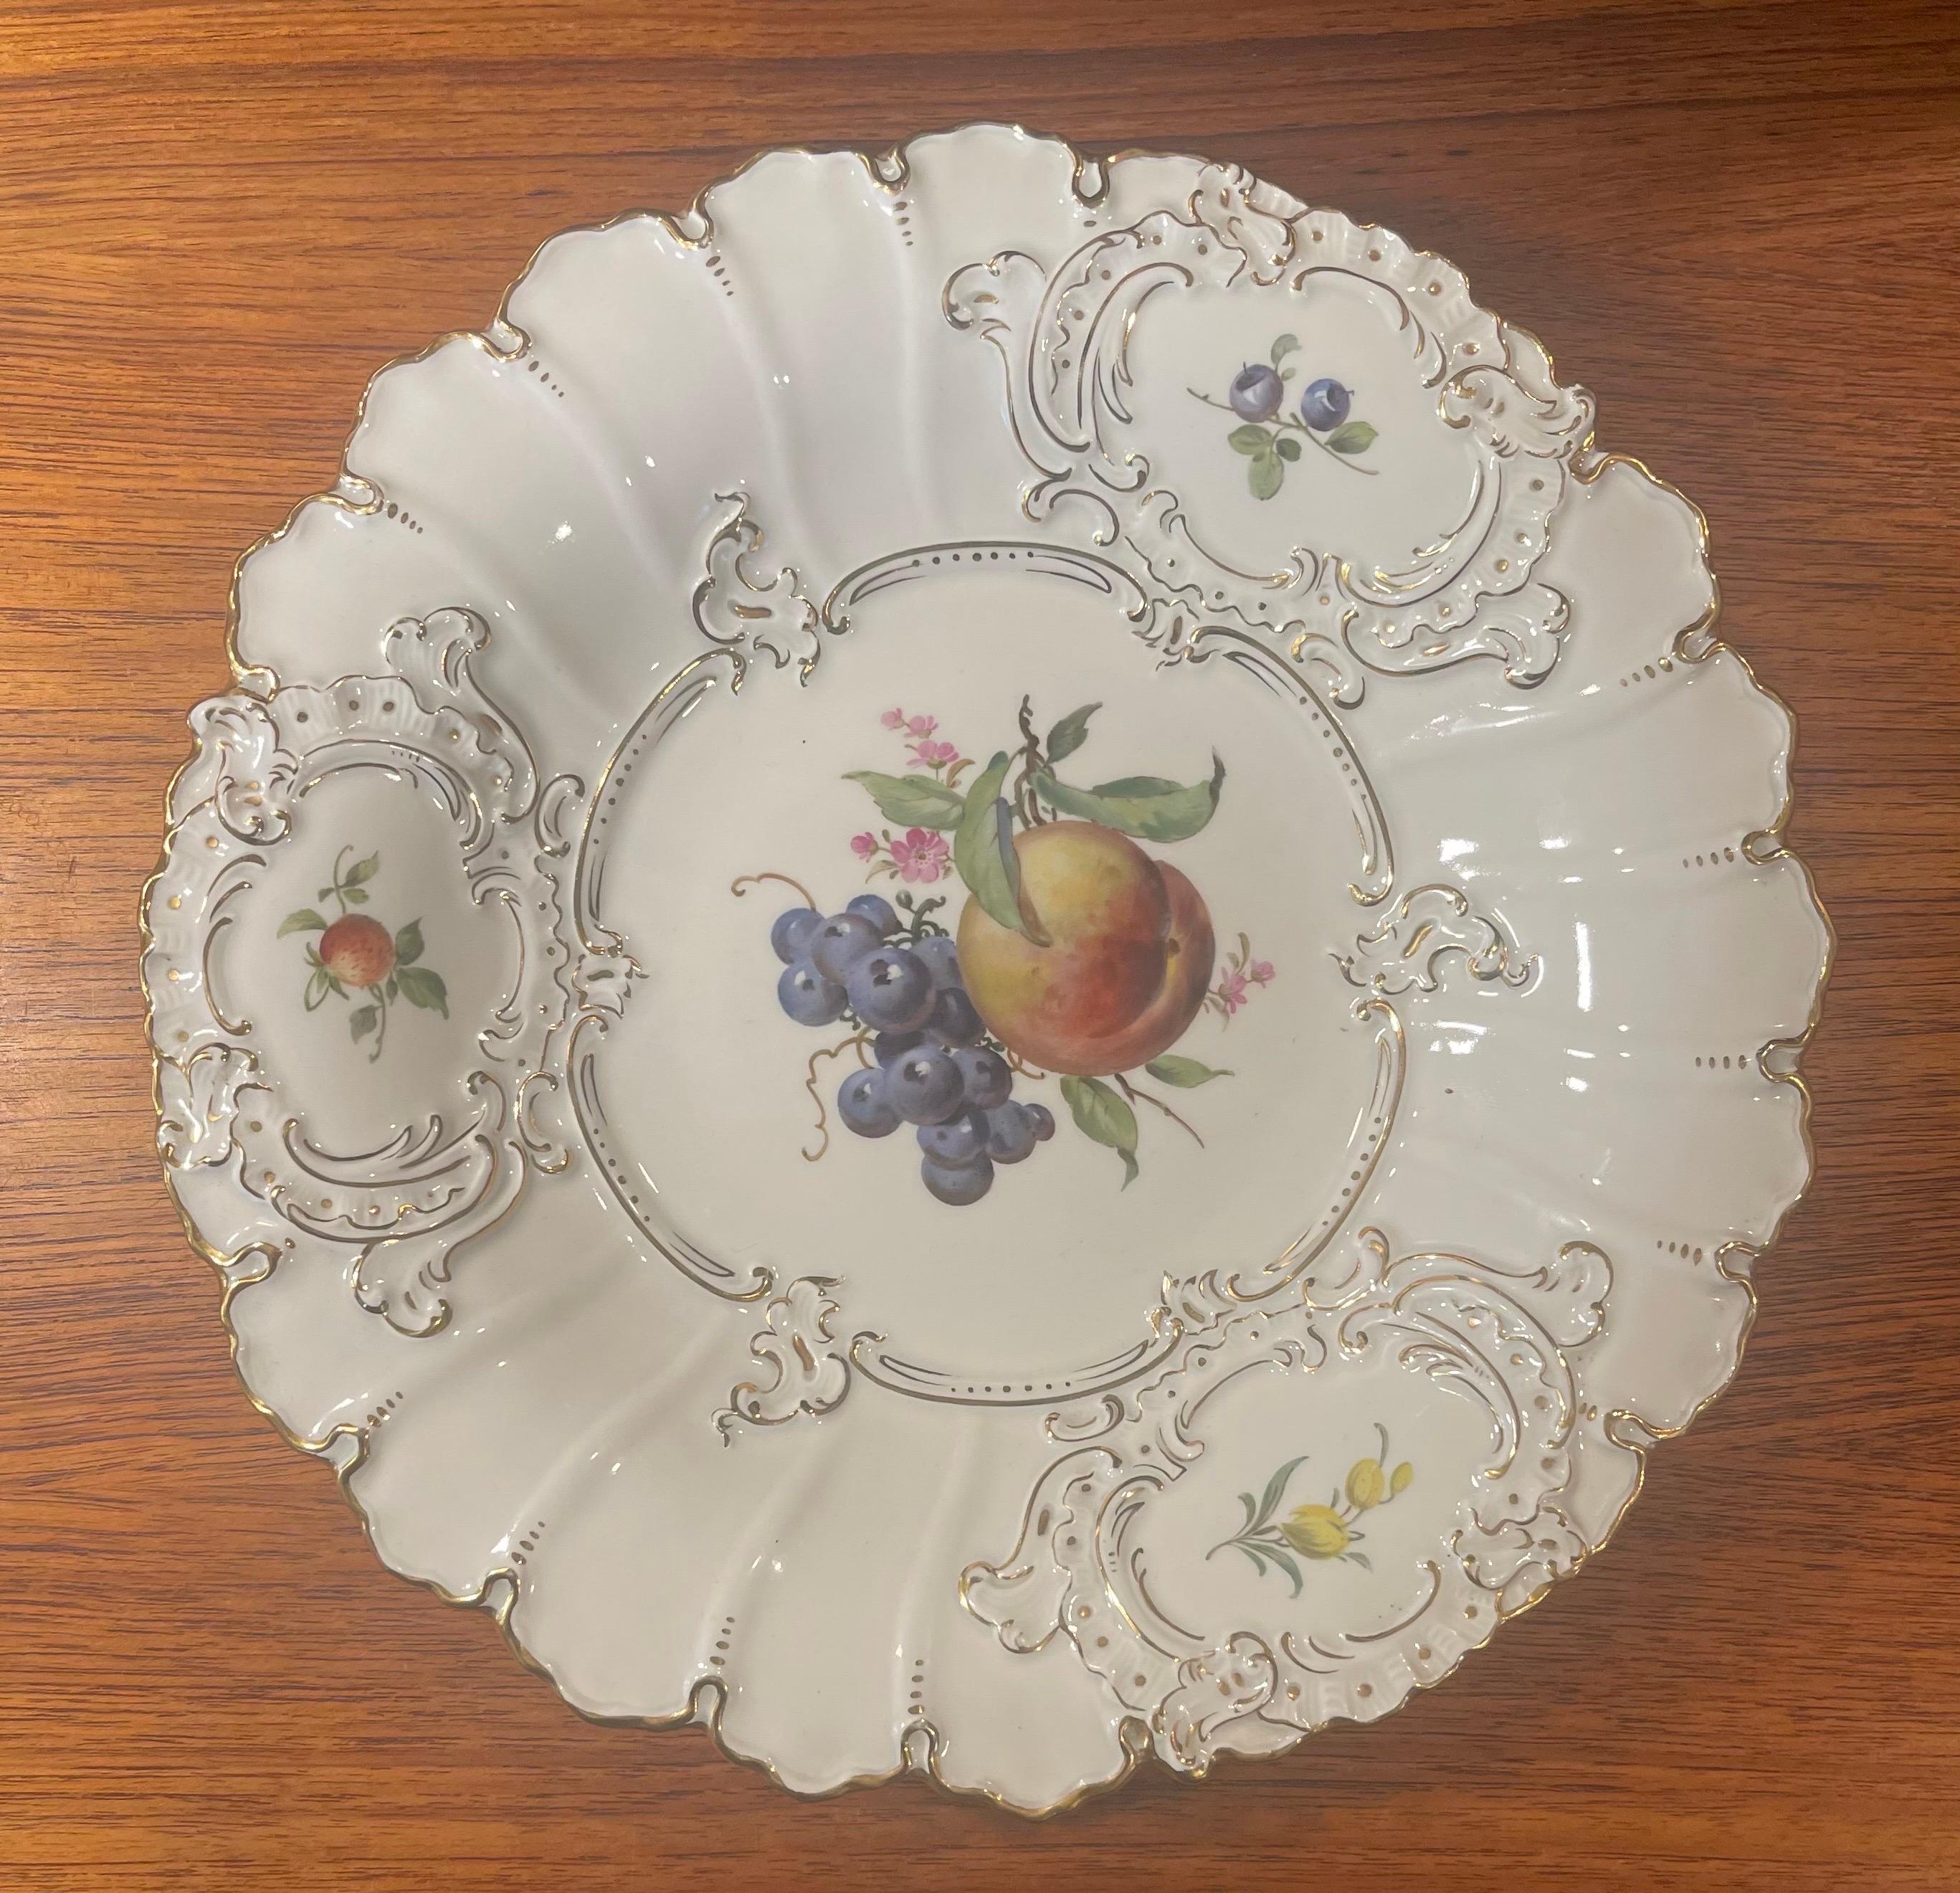 Antique porcelain cabinet bowl by Meissen of Germany, circa 1900. The piece is in very good condition with no chips or cracks and clear vibrant colors. The bowl measures 12